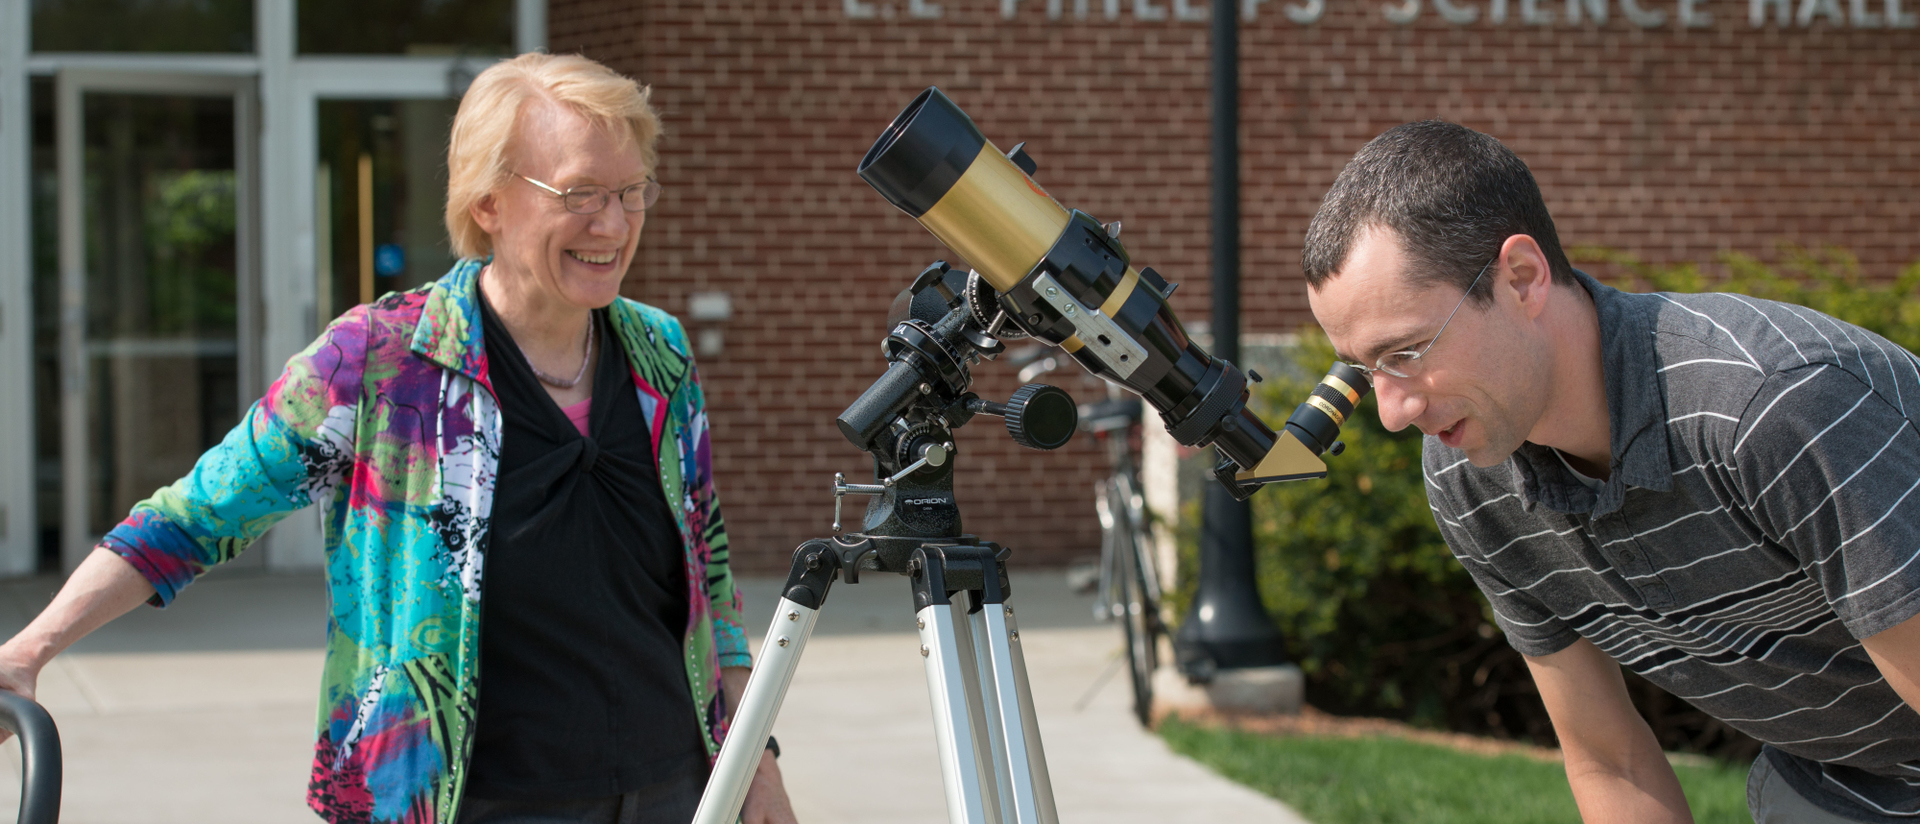 Professor and student looking through telescope